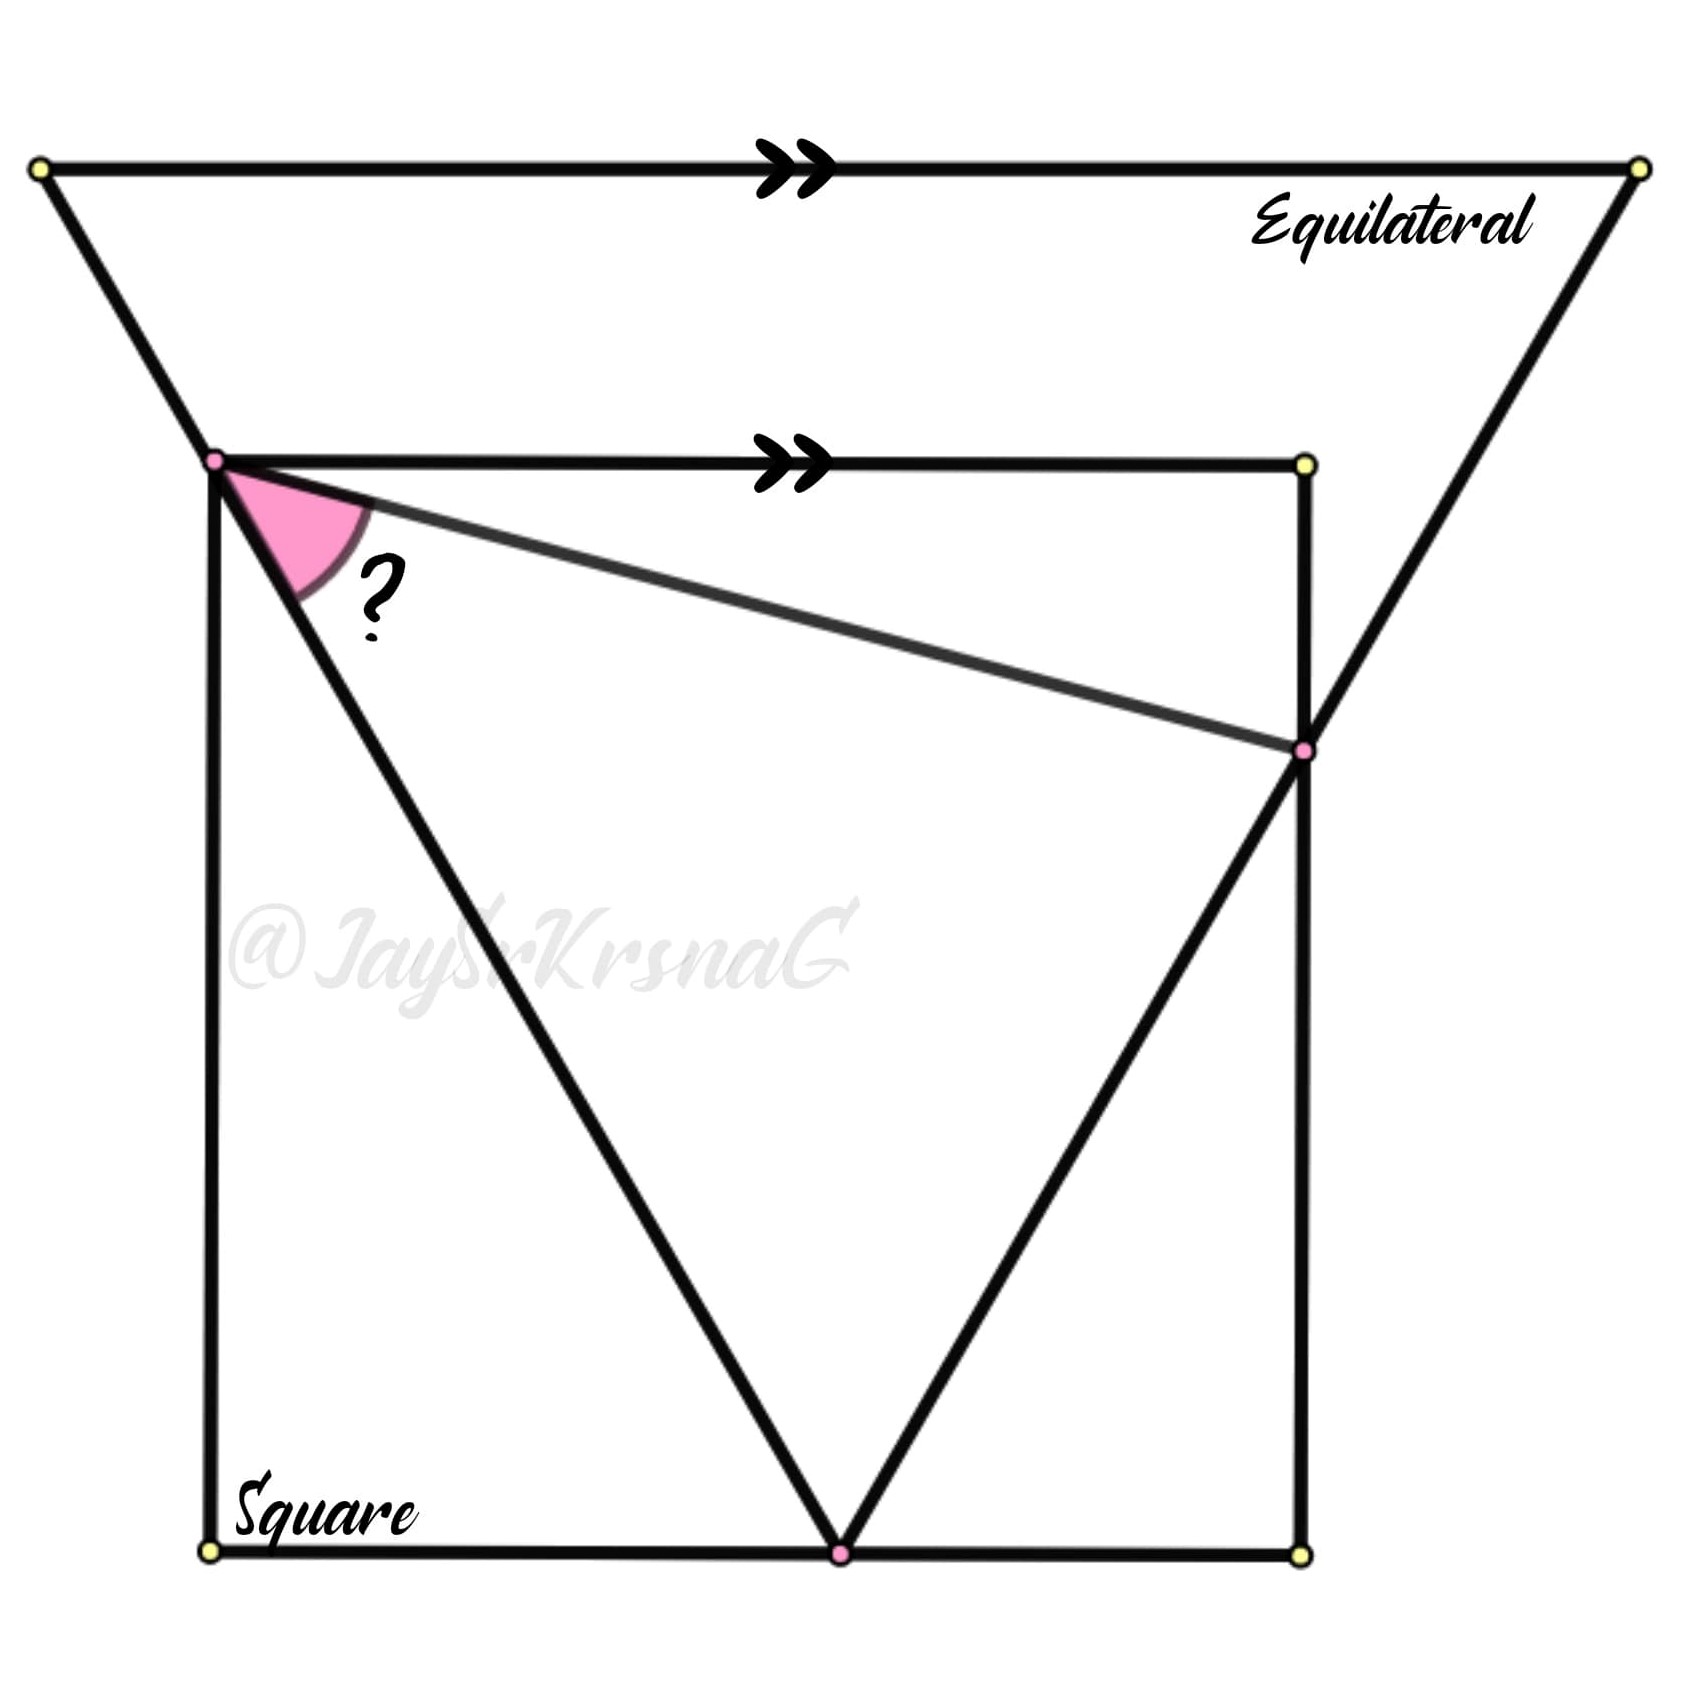 Math puzzle: Find the measure of the pink angle in this diagram with a square and an equilateral triangle